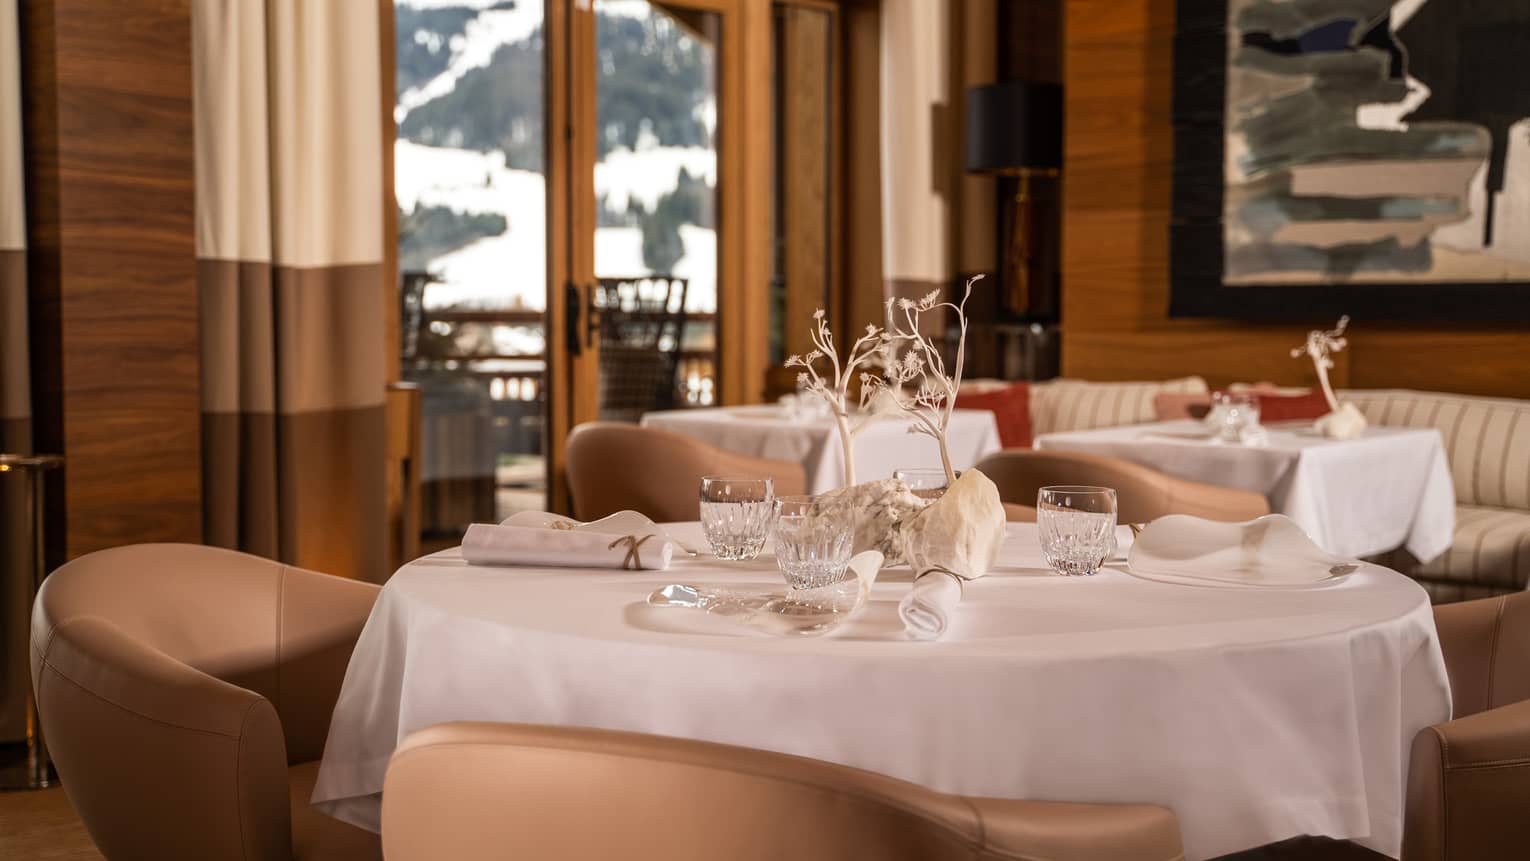 Round tablecloth-clad dining table and tan round chairs in wood-panelled restaurant with snowy mountain view